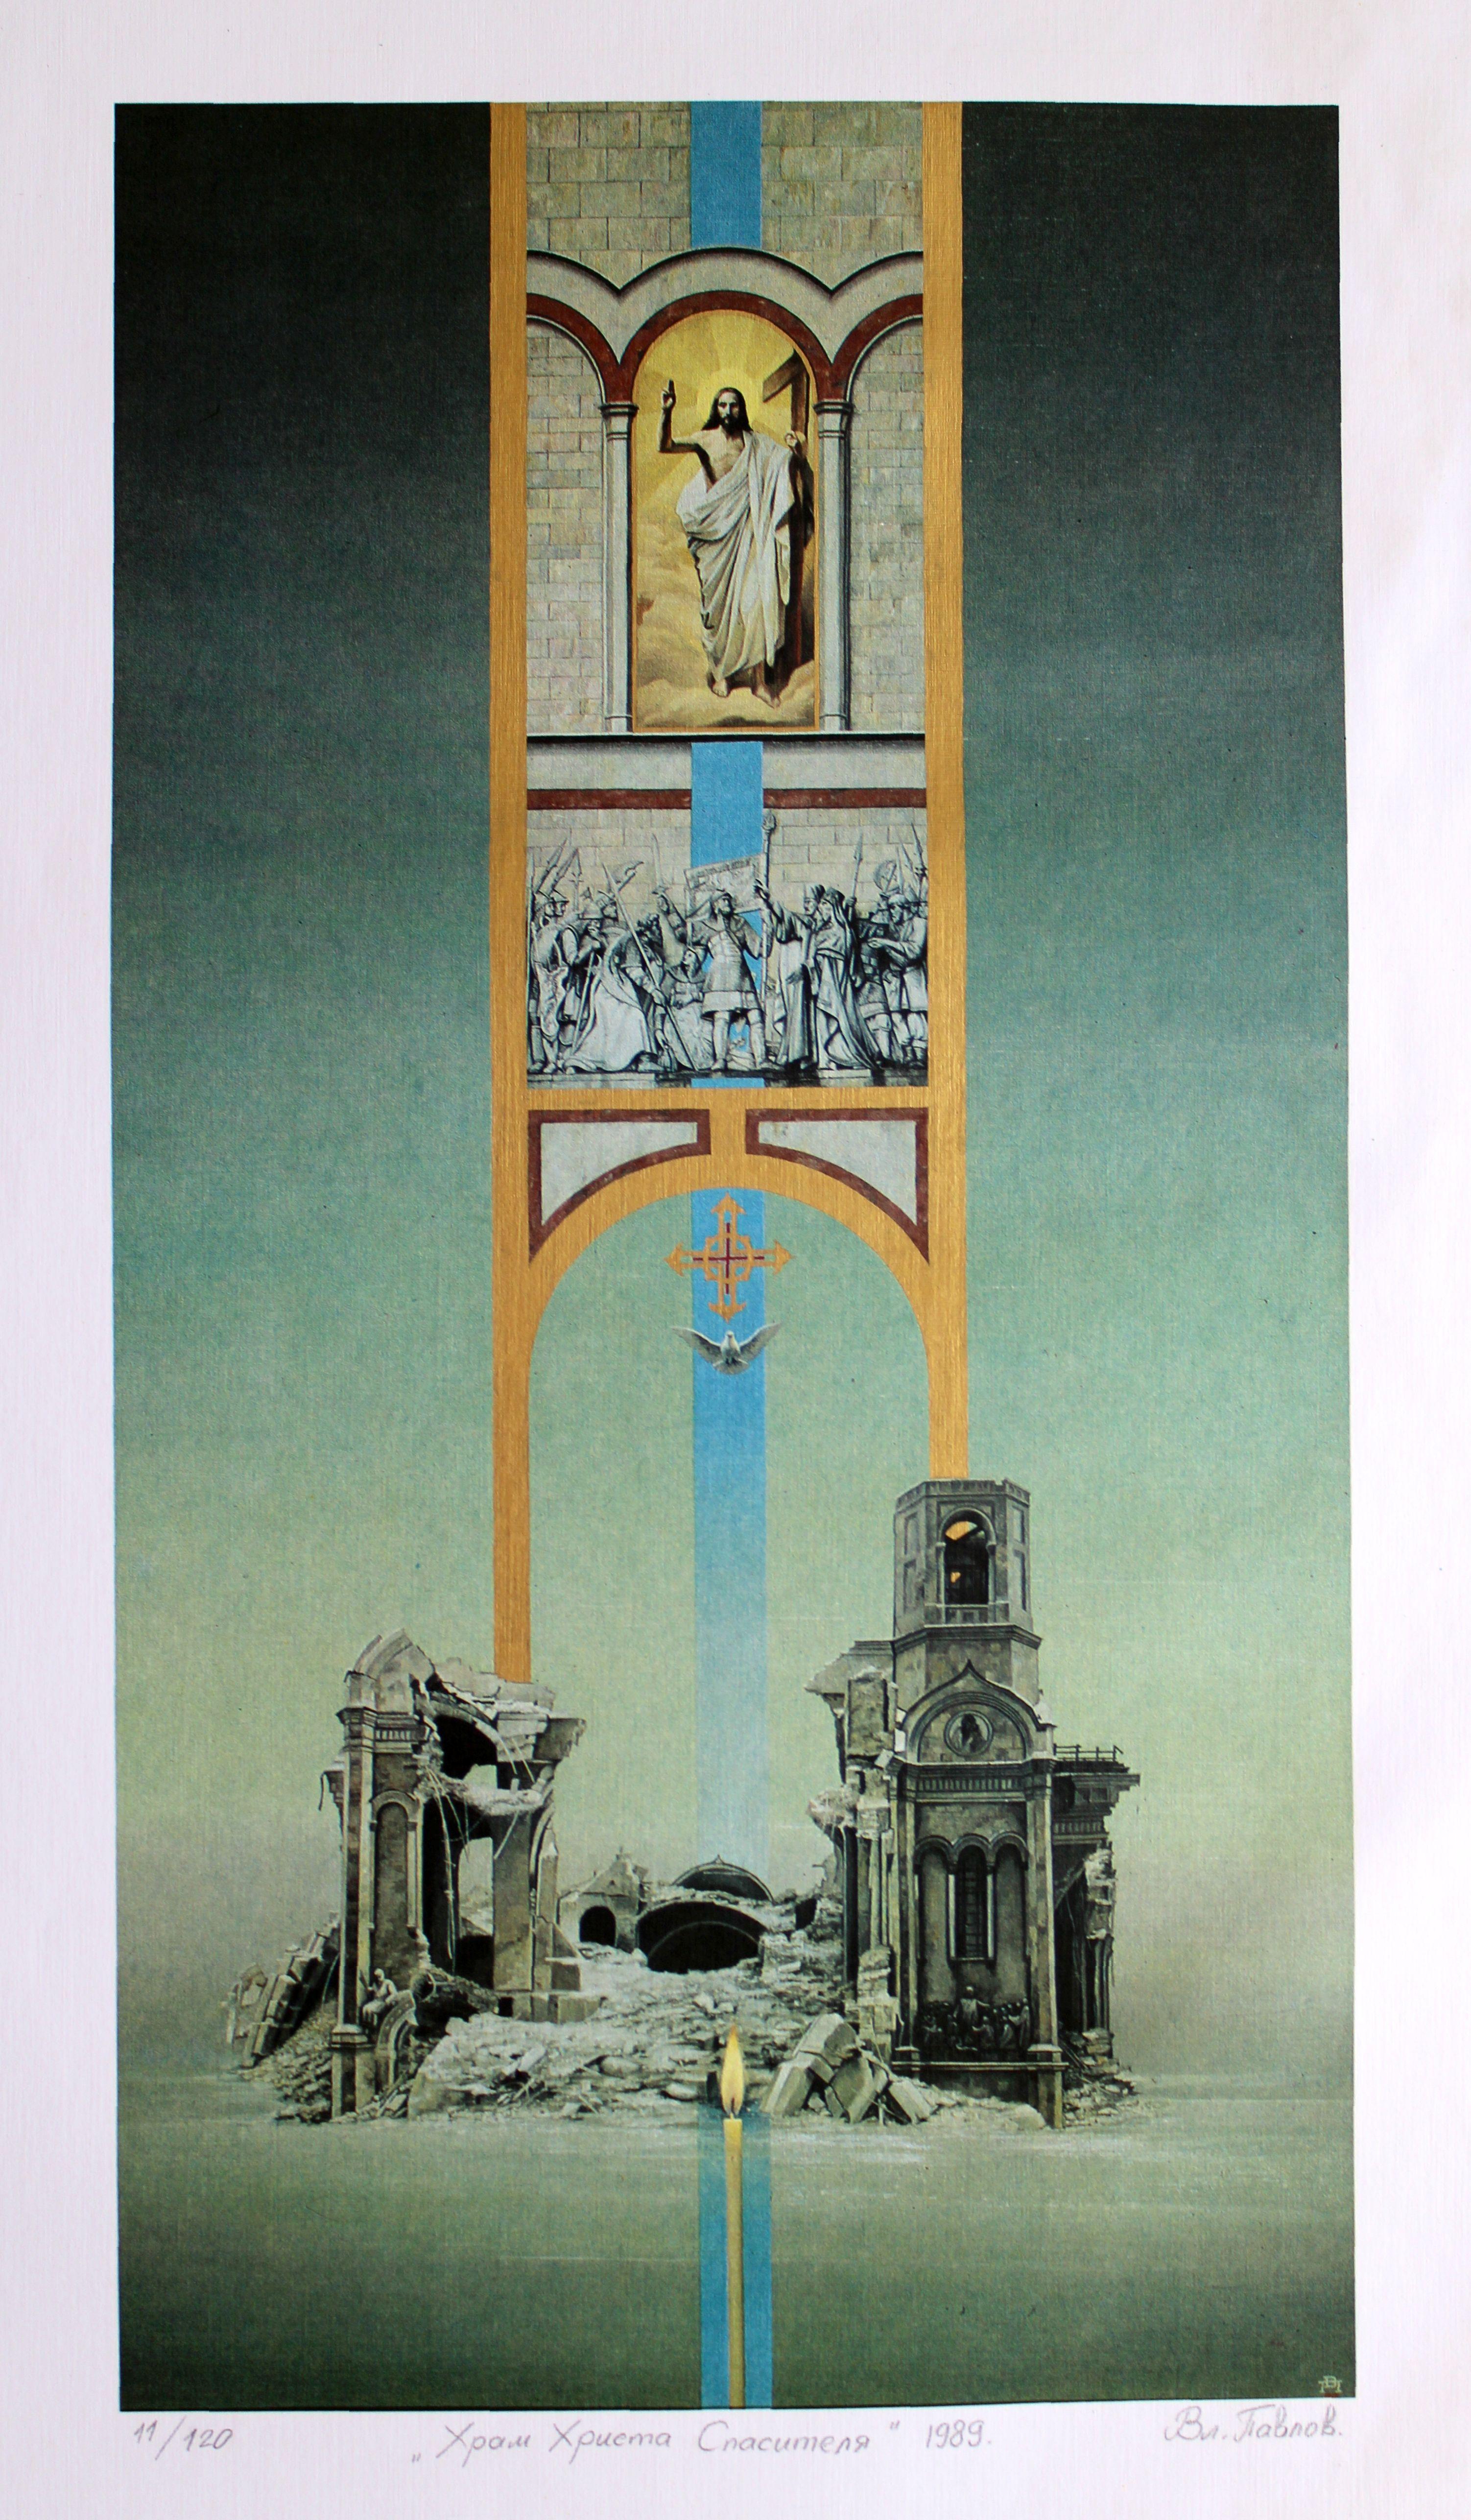 Cathedral of Christ the Savior. 1989., paper, screen print, 60x32.5 cm